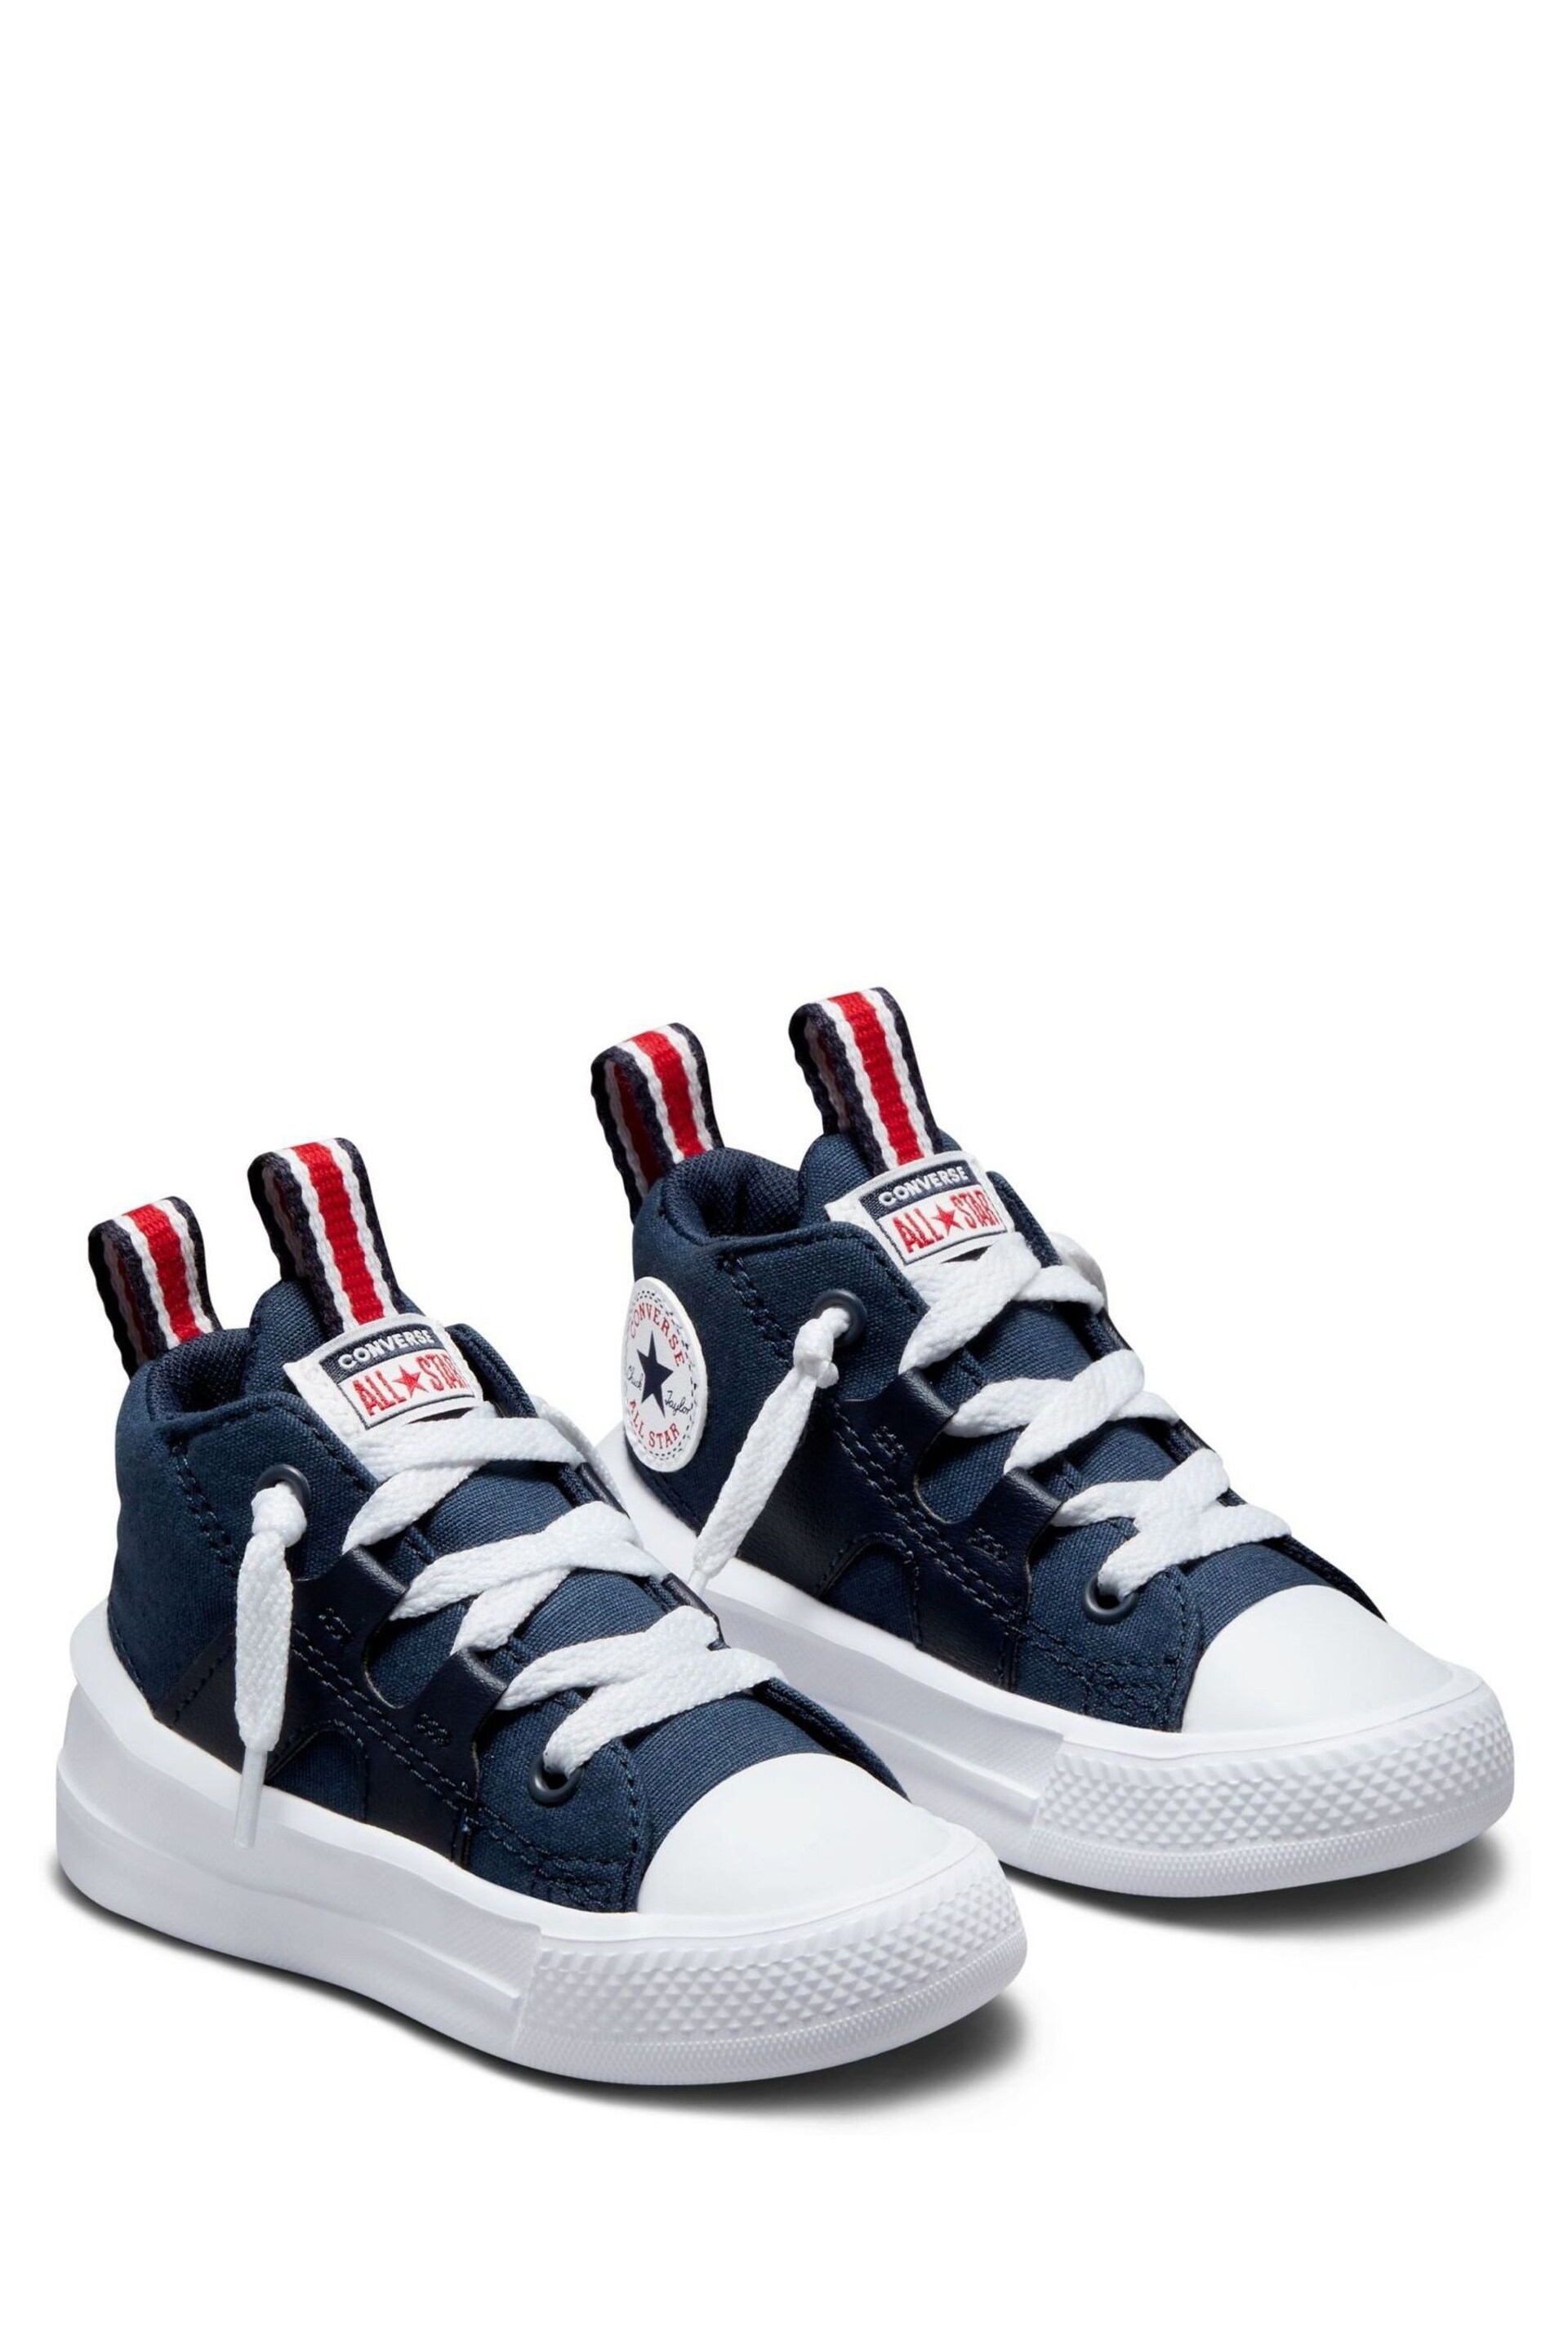 Converse Navy Ultra Infant Trainers - Image 3 of 7